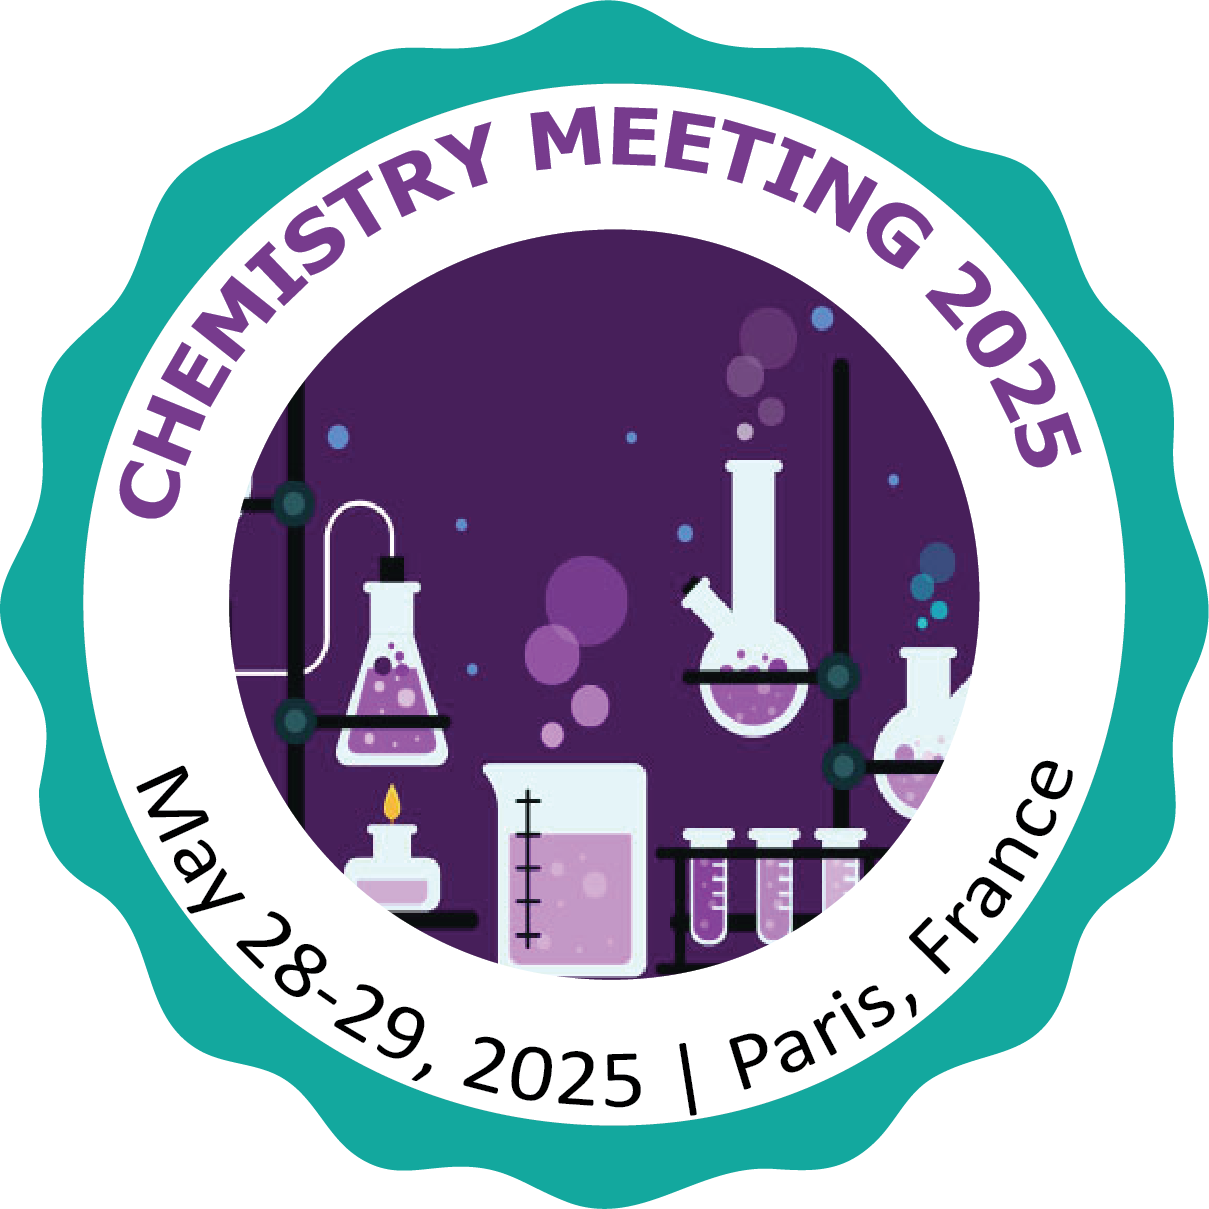 cs/upload-images/chemistrymeeting-2025-11310.png